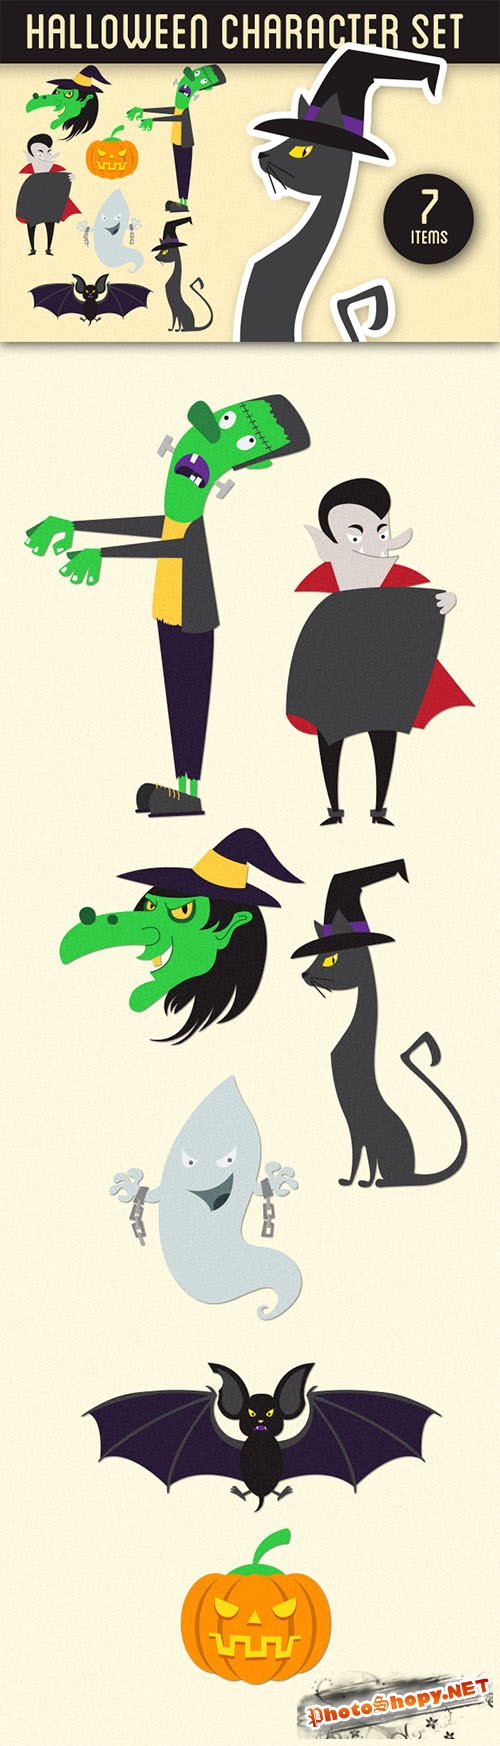 Halloween Characters Vector Illustrations Pack 1